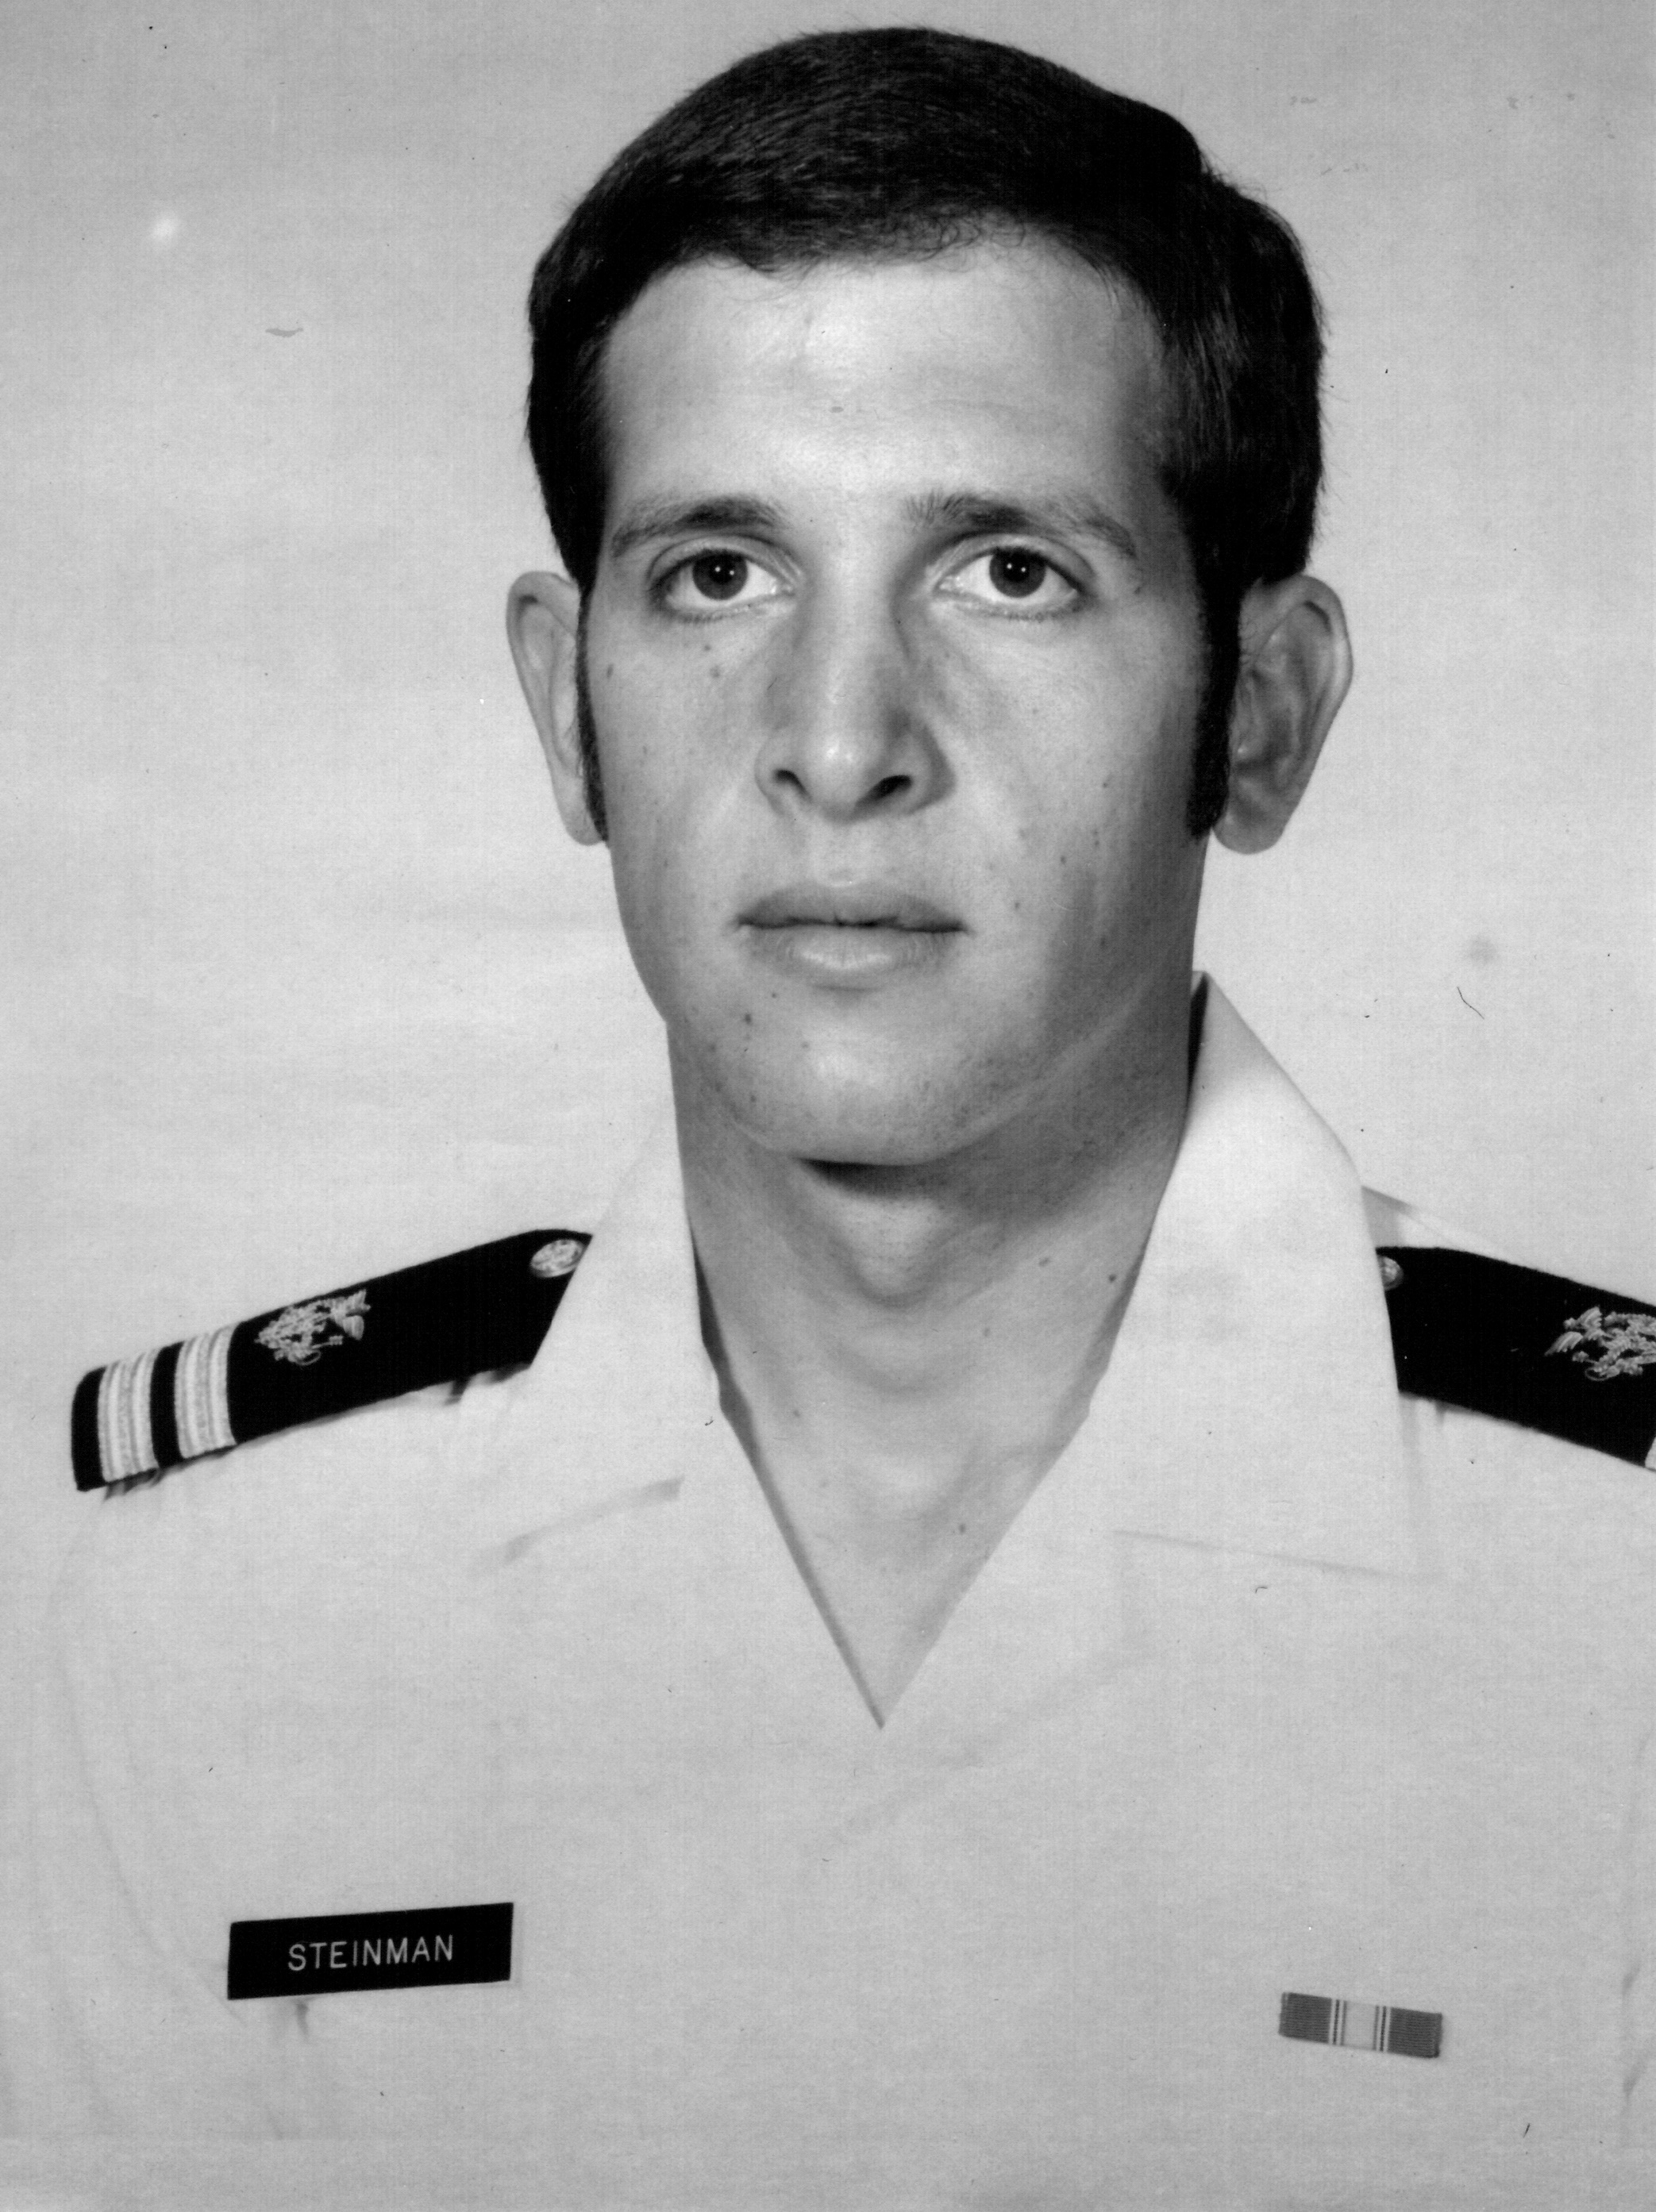 Lieutenant Alan Steinman upon joining the U.S. Coast Guard as a medical officer from the U.S. Public Health Service, Elizabeth City, NC, 1973.